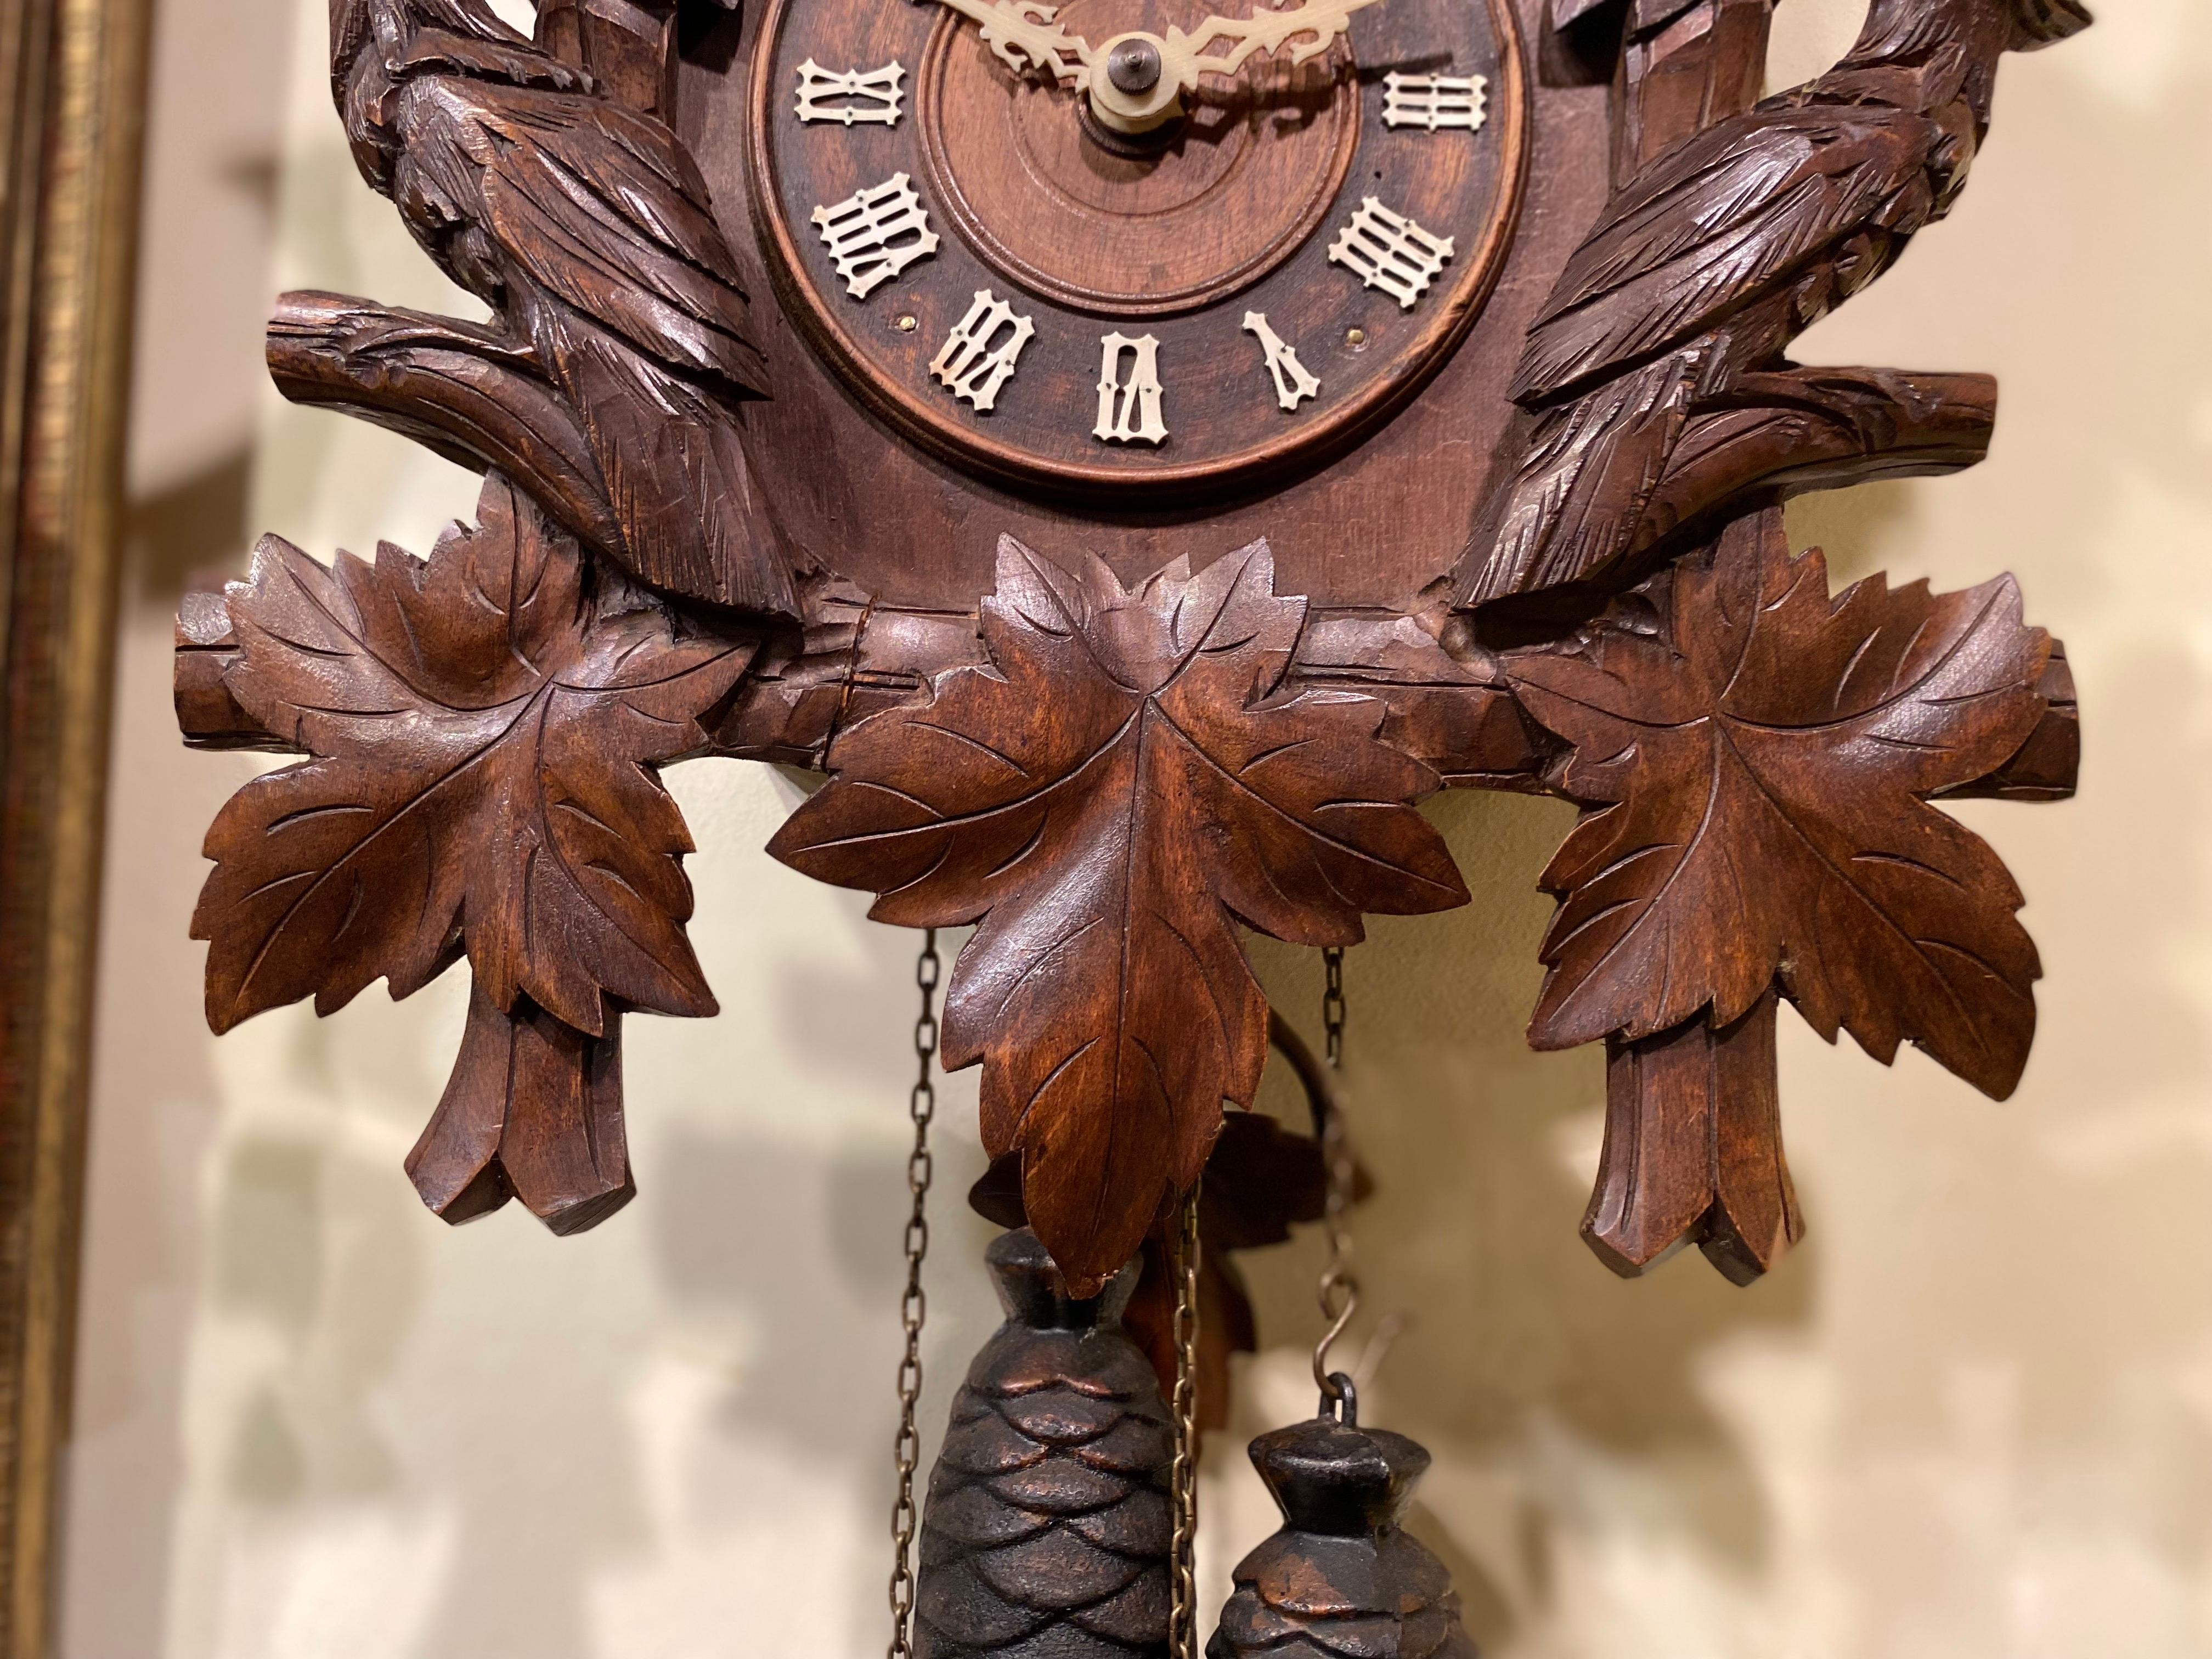 Rare 8 Day Black Forest Carved Oak Cuckoo Clock.
Carved Cuckoos Have Glass Eyes.
Cuckoos On The Half & The Hour.
Measures: 20